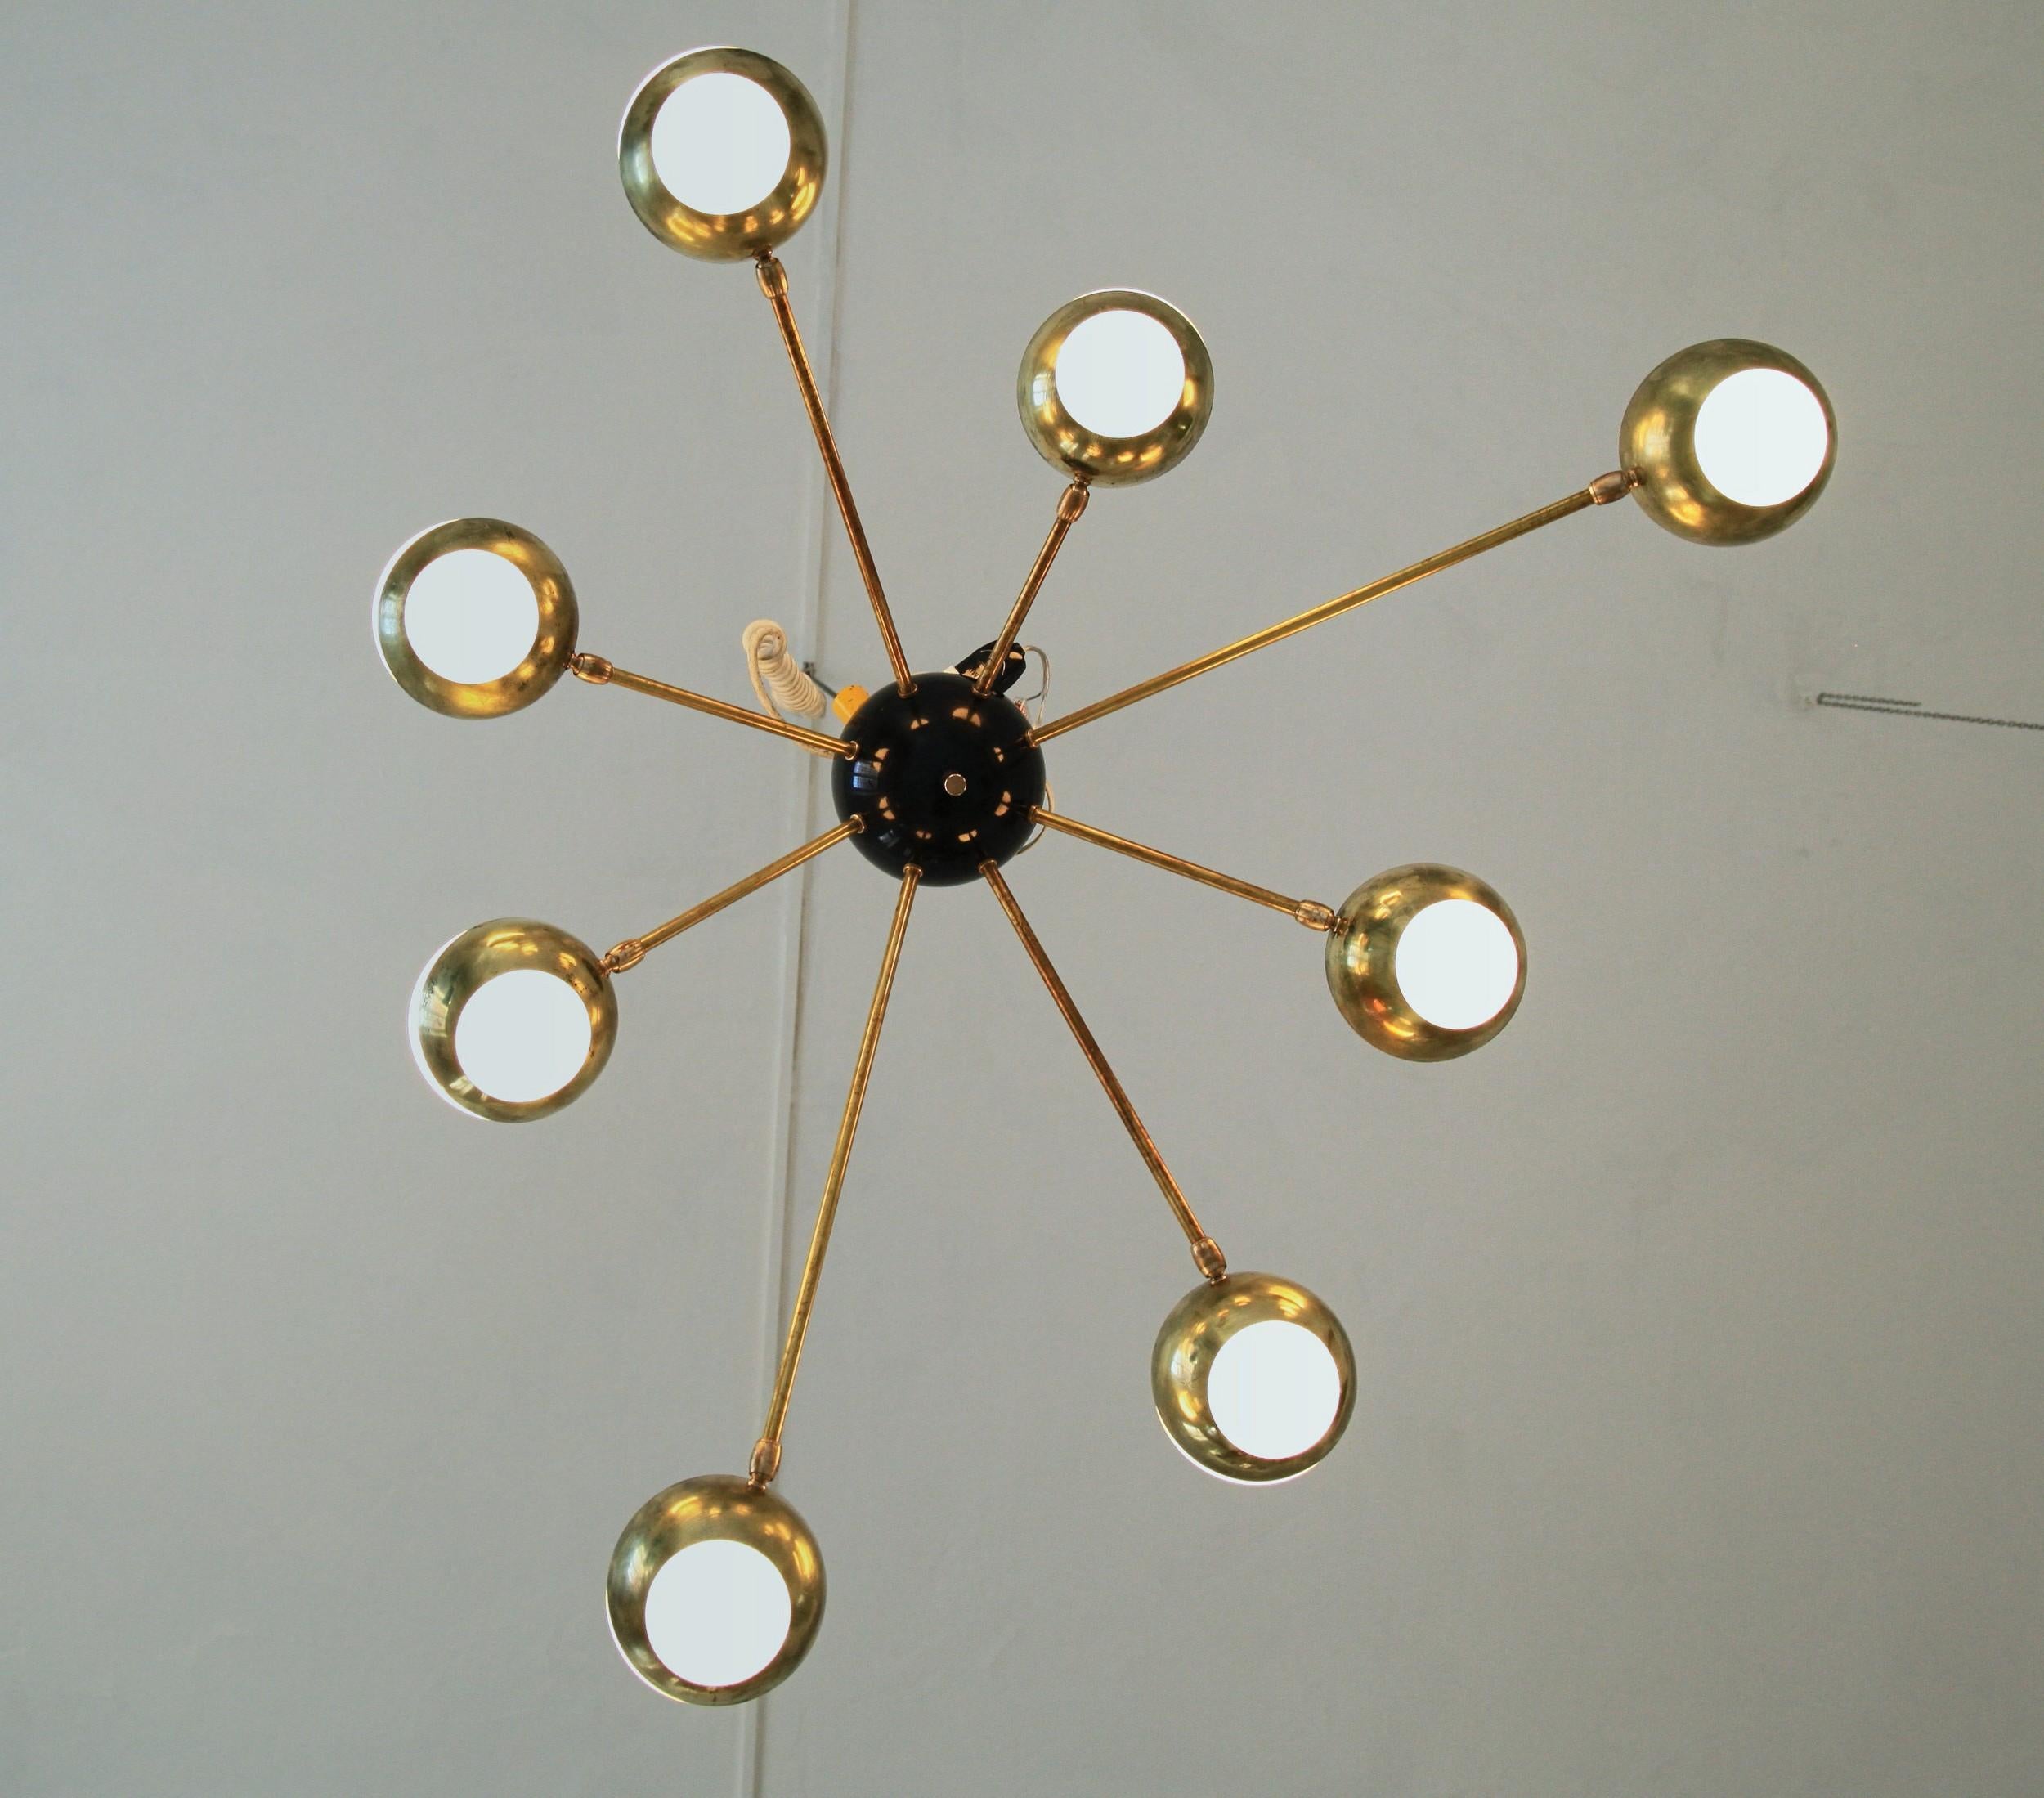 Italian Flush Mount Brass and Glass Chandelier 8 Arms, Stilnovo Style, Low Ceiling Best For Sale